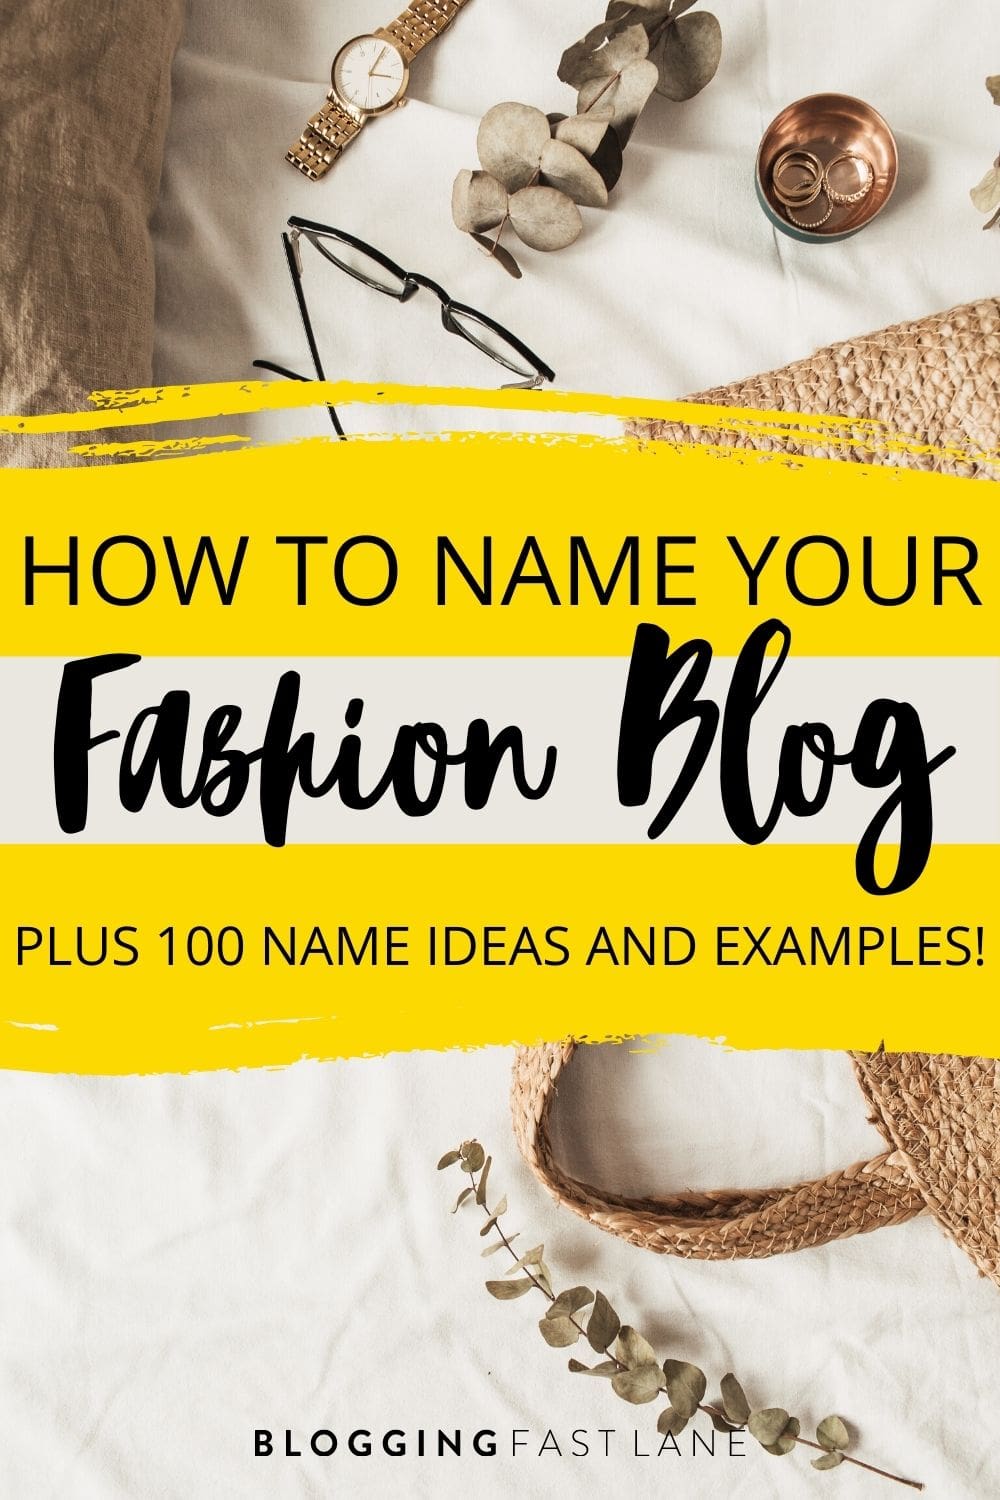 How to Name Your Fashion Blog (+ 100 Name Ideas & Examples)